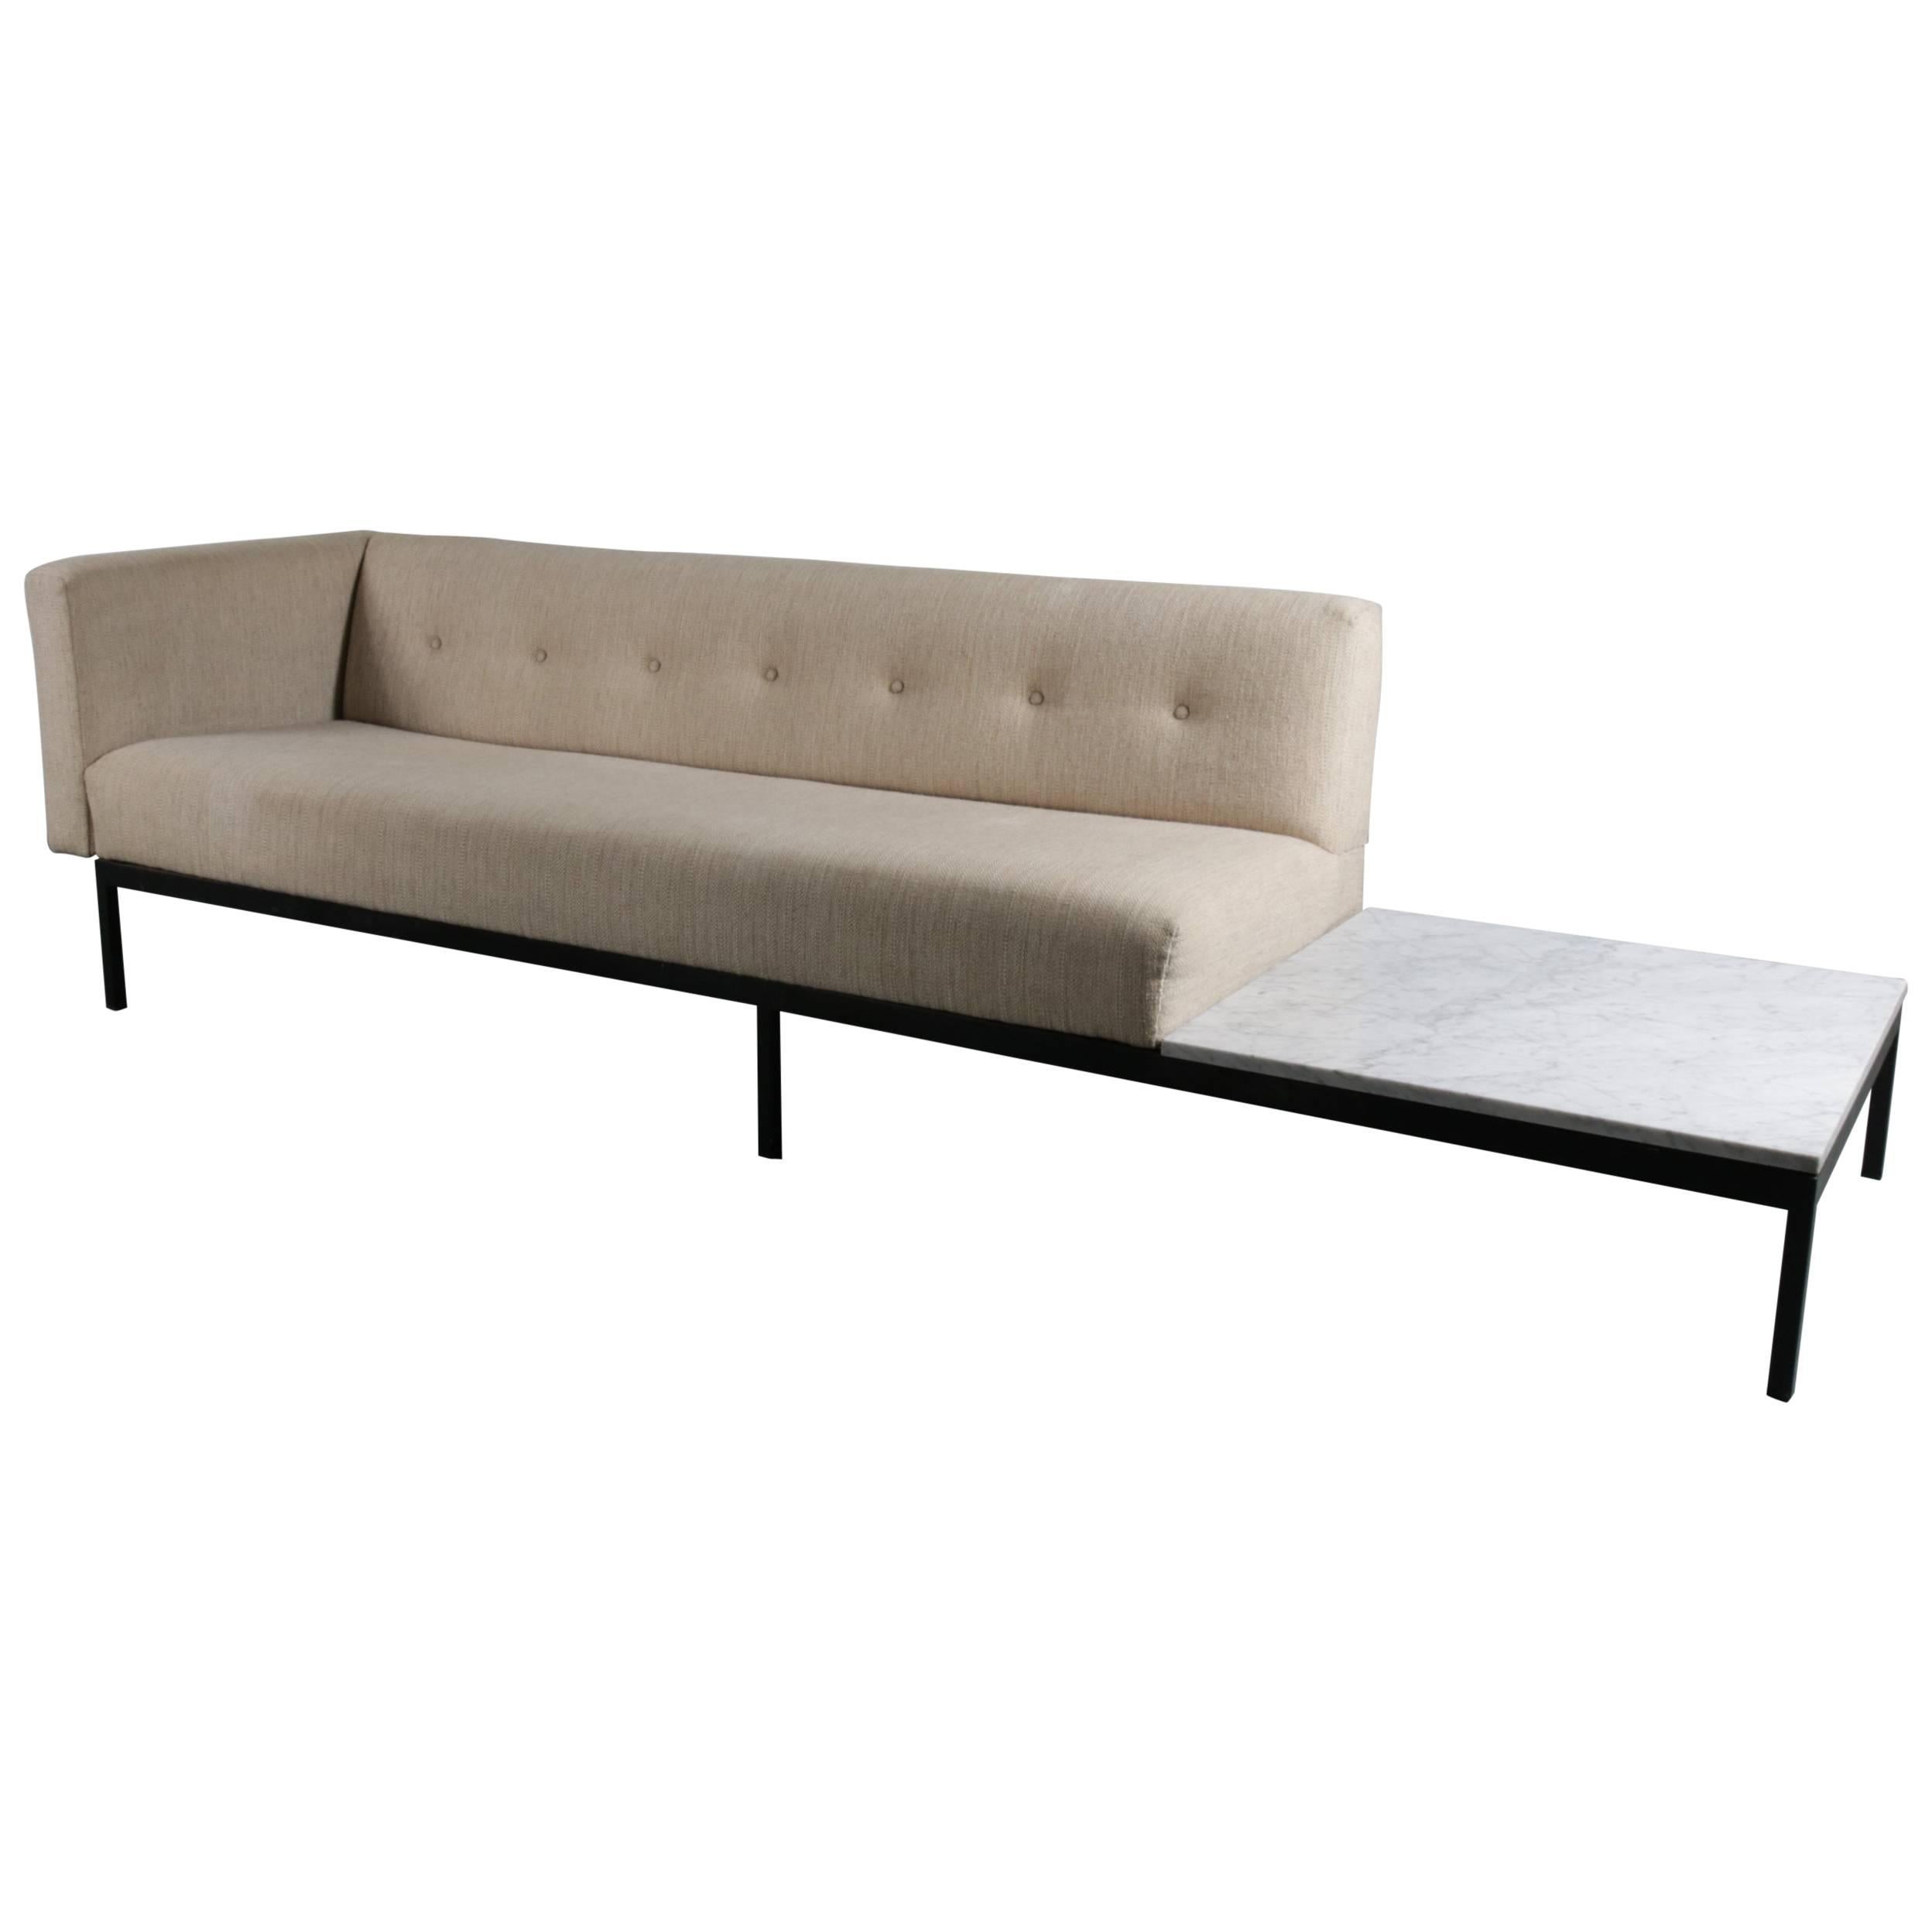 Rare "070" Sofa by Kho Liang Ie for Artifort, Netherlands, 1960 For Sale